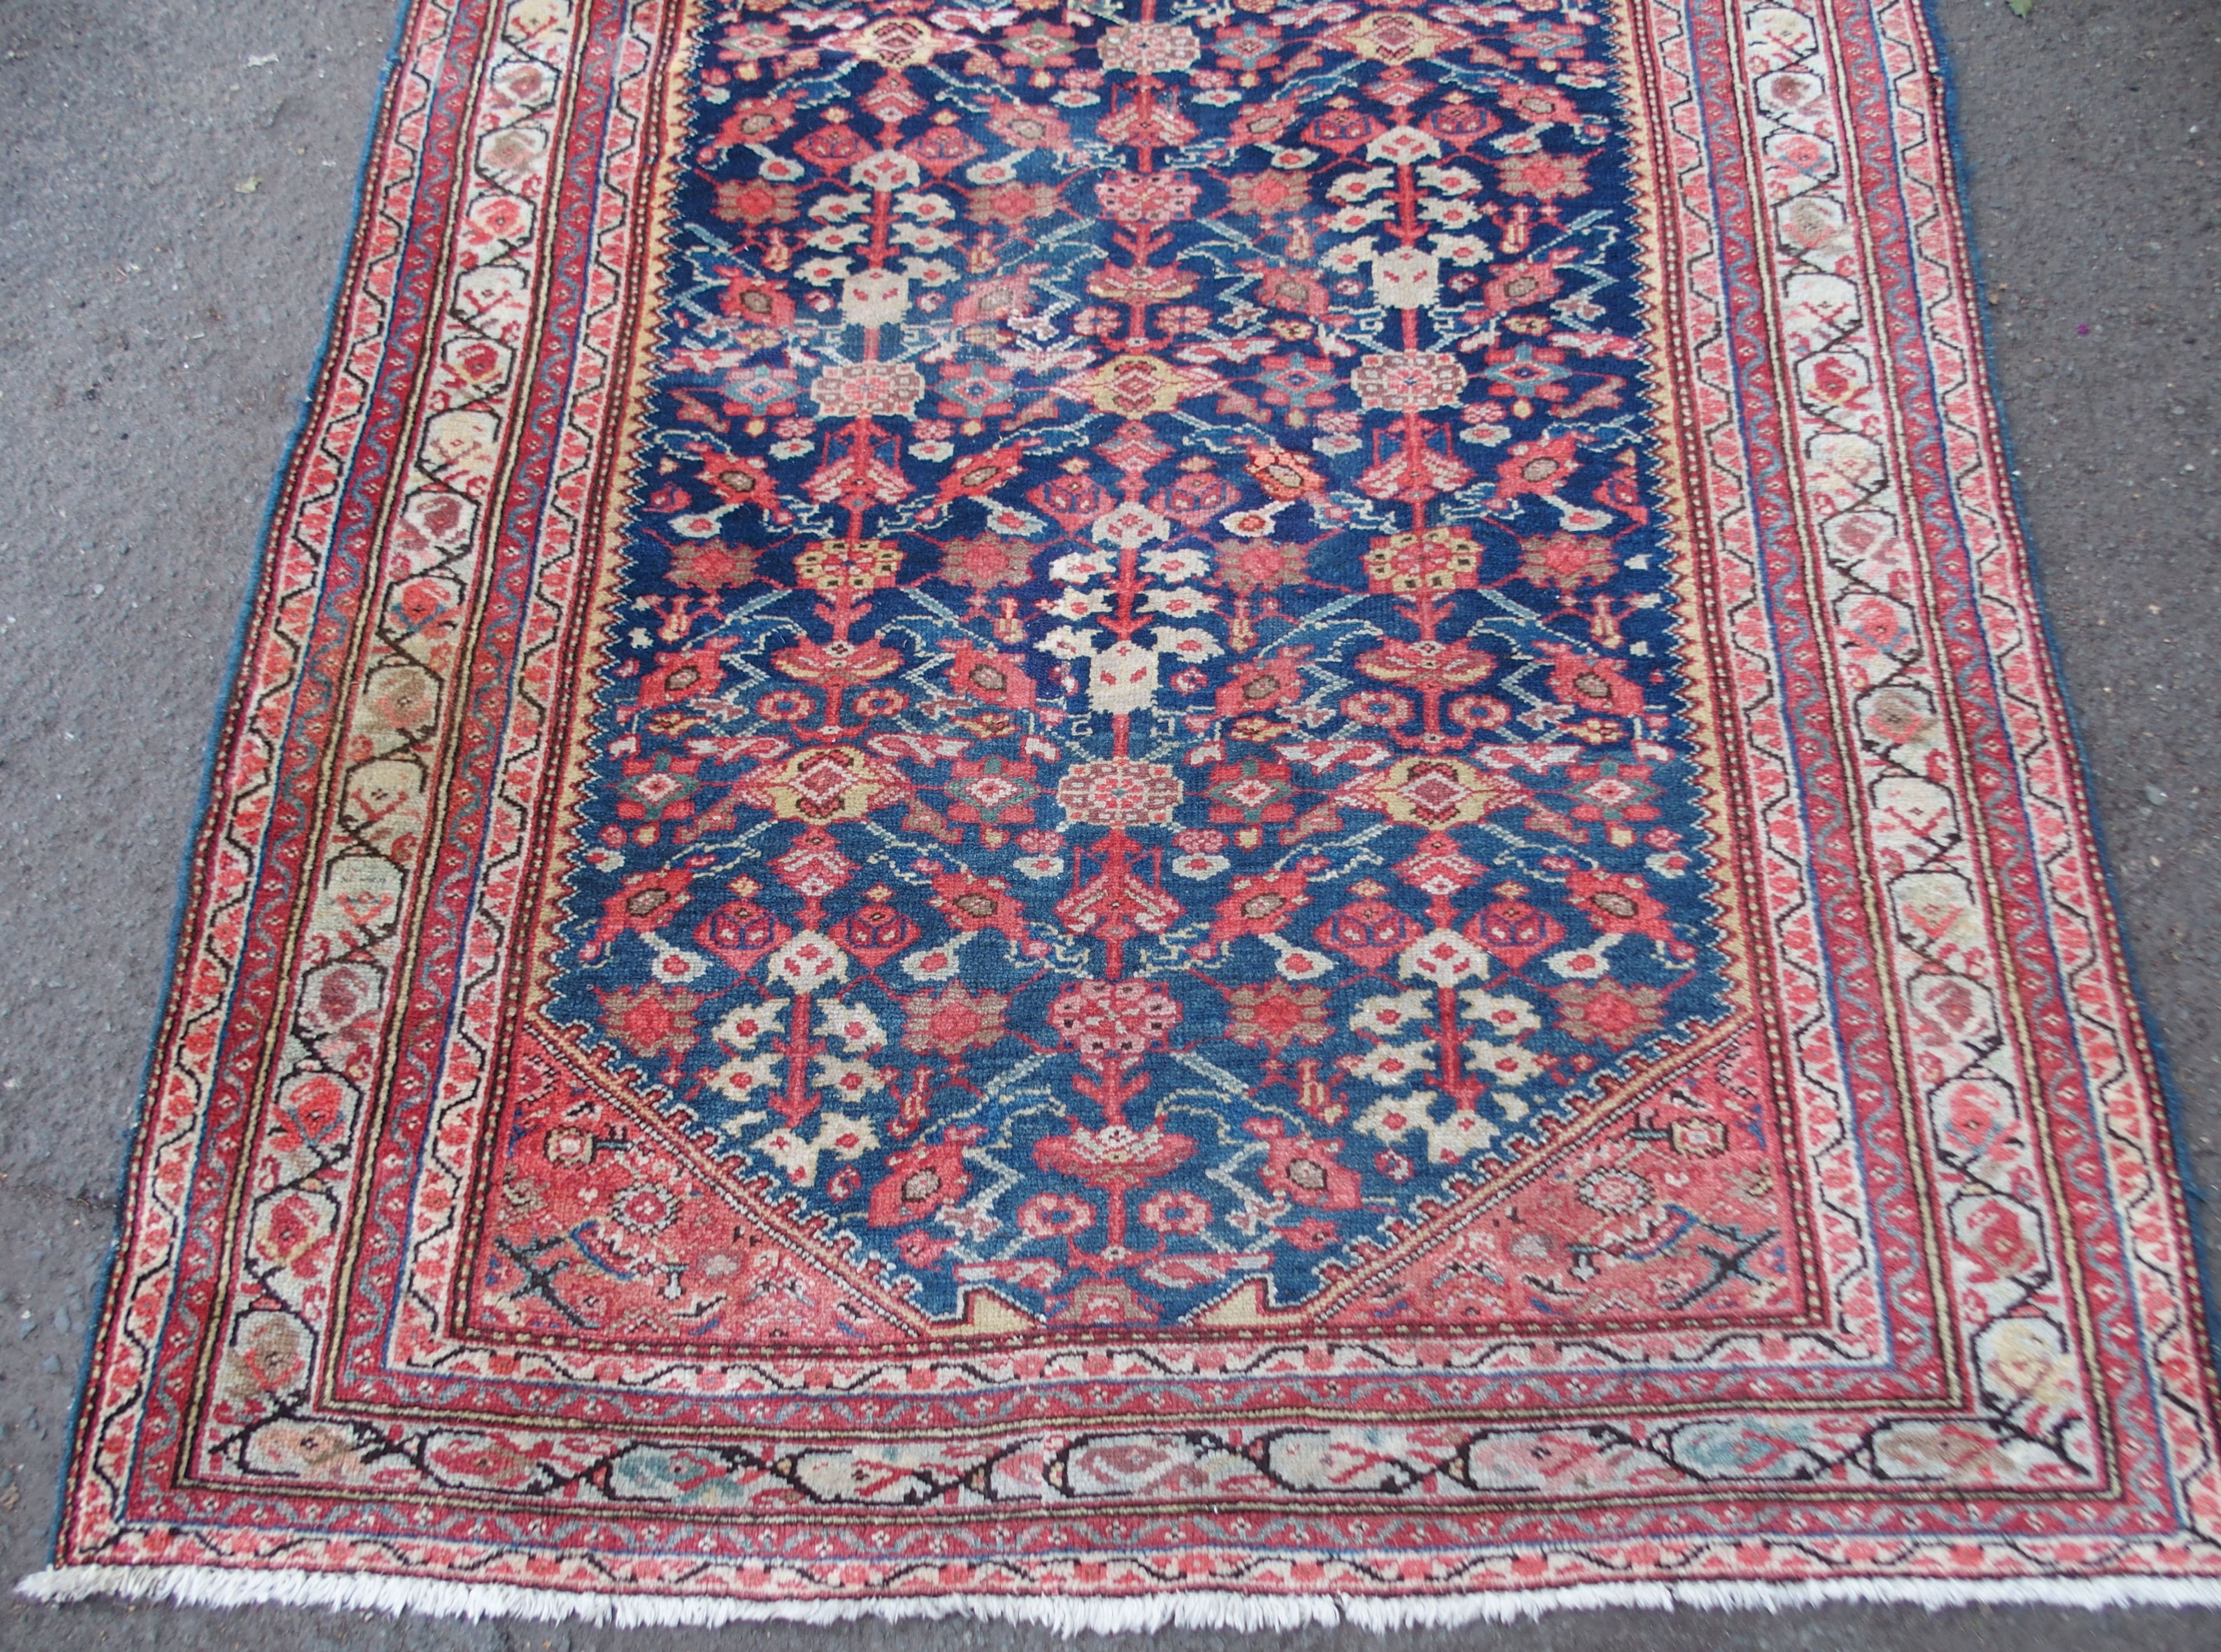 A HAMADAN BLUE GROUND RUNNER with allover design and multiple borders, 393cm x 134cm Condition - Image 2 of 5